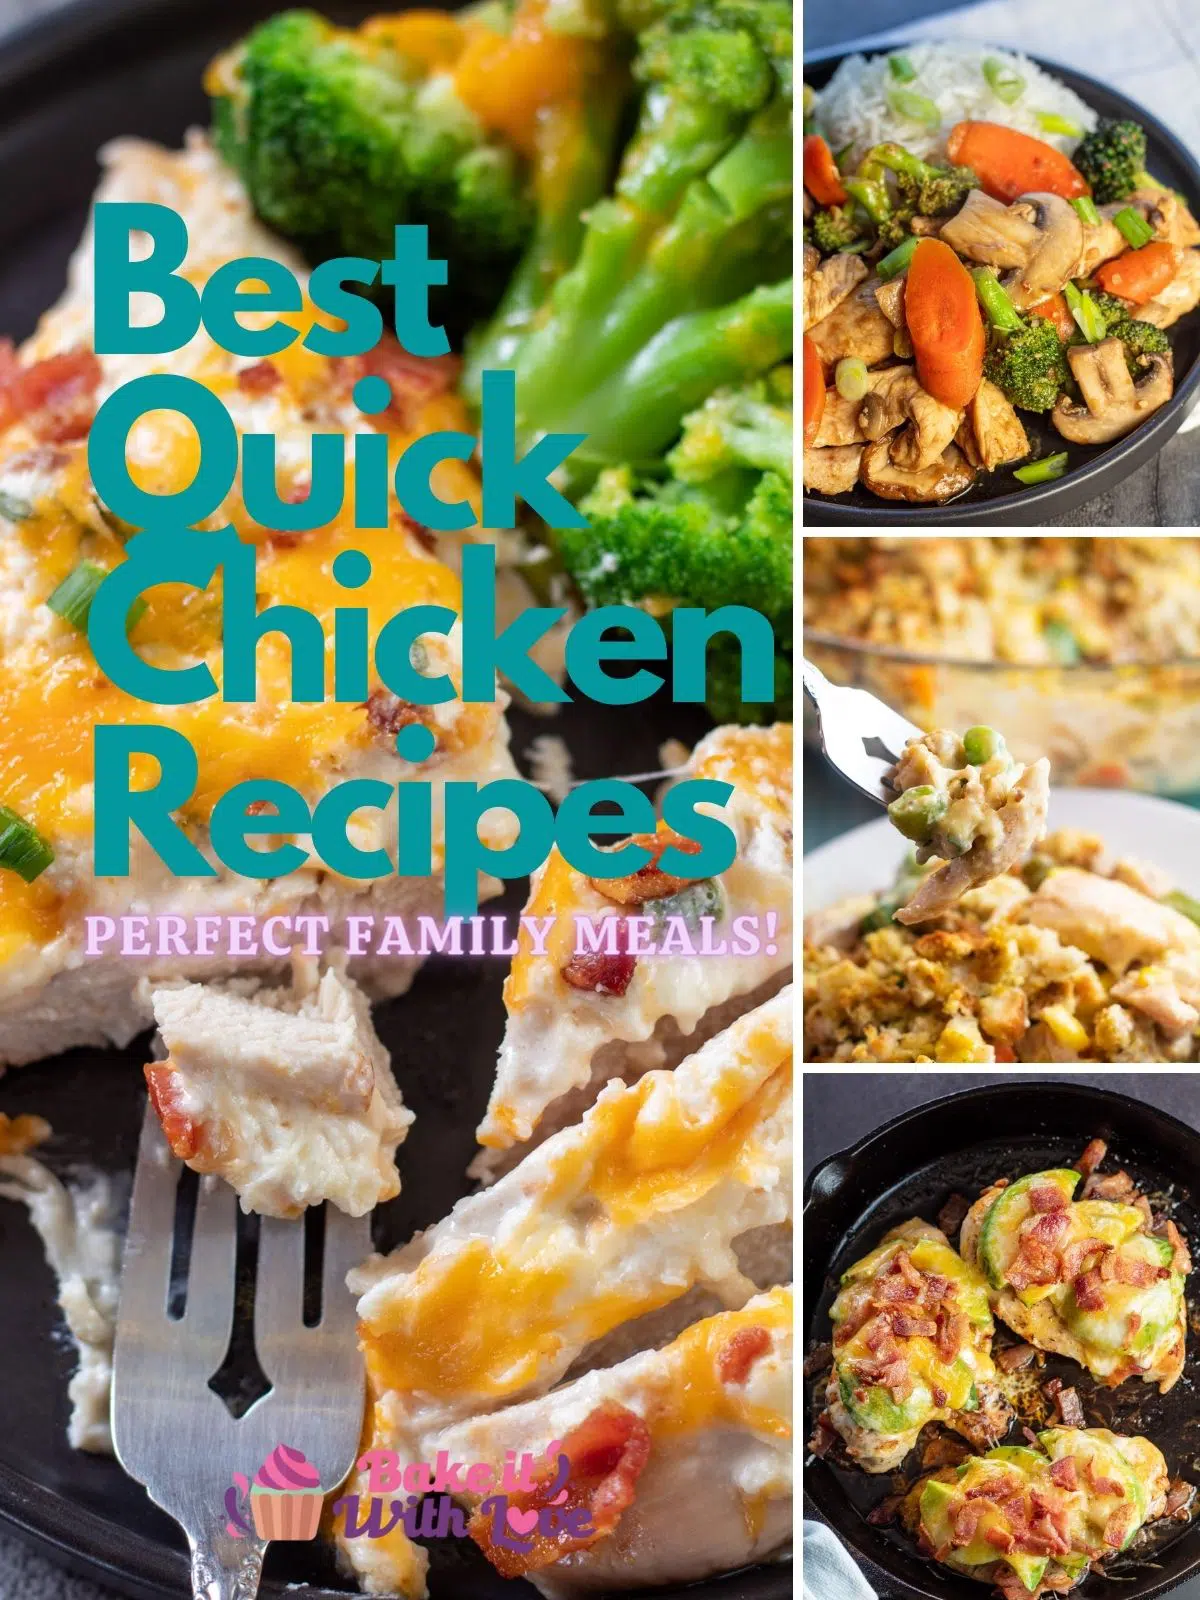 Best quick chicken recipes pin with text header over 4 image collage.